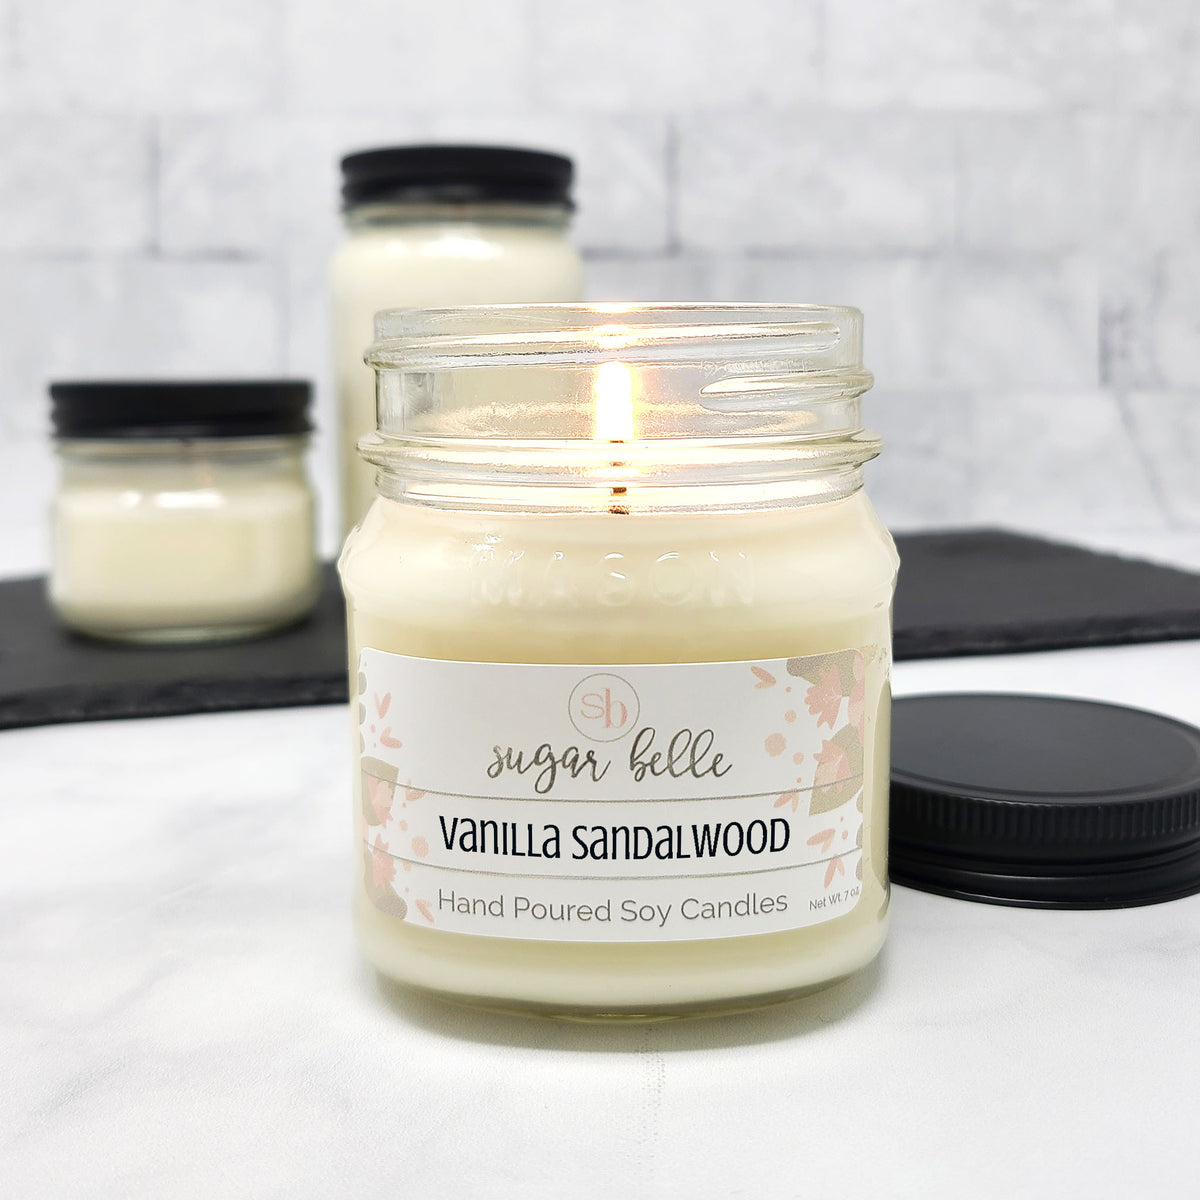 Vanilla Sandalwood Scented Soy Wax Melts – Sugar Belle Candles